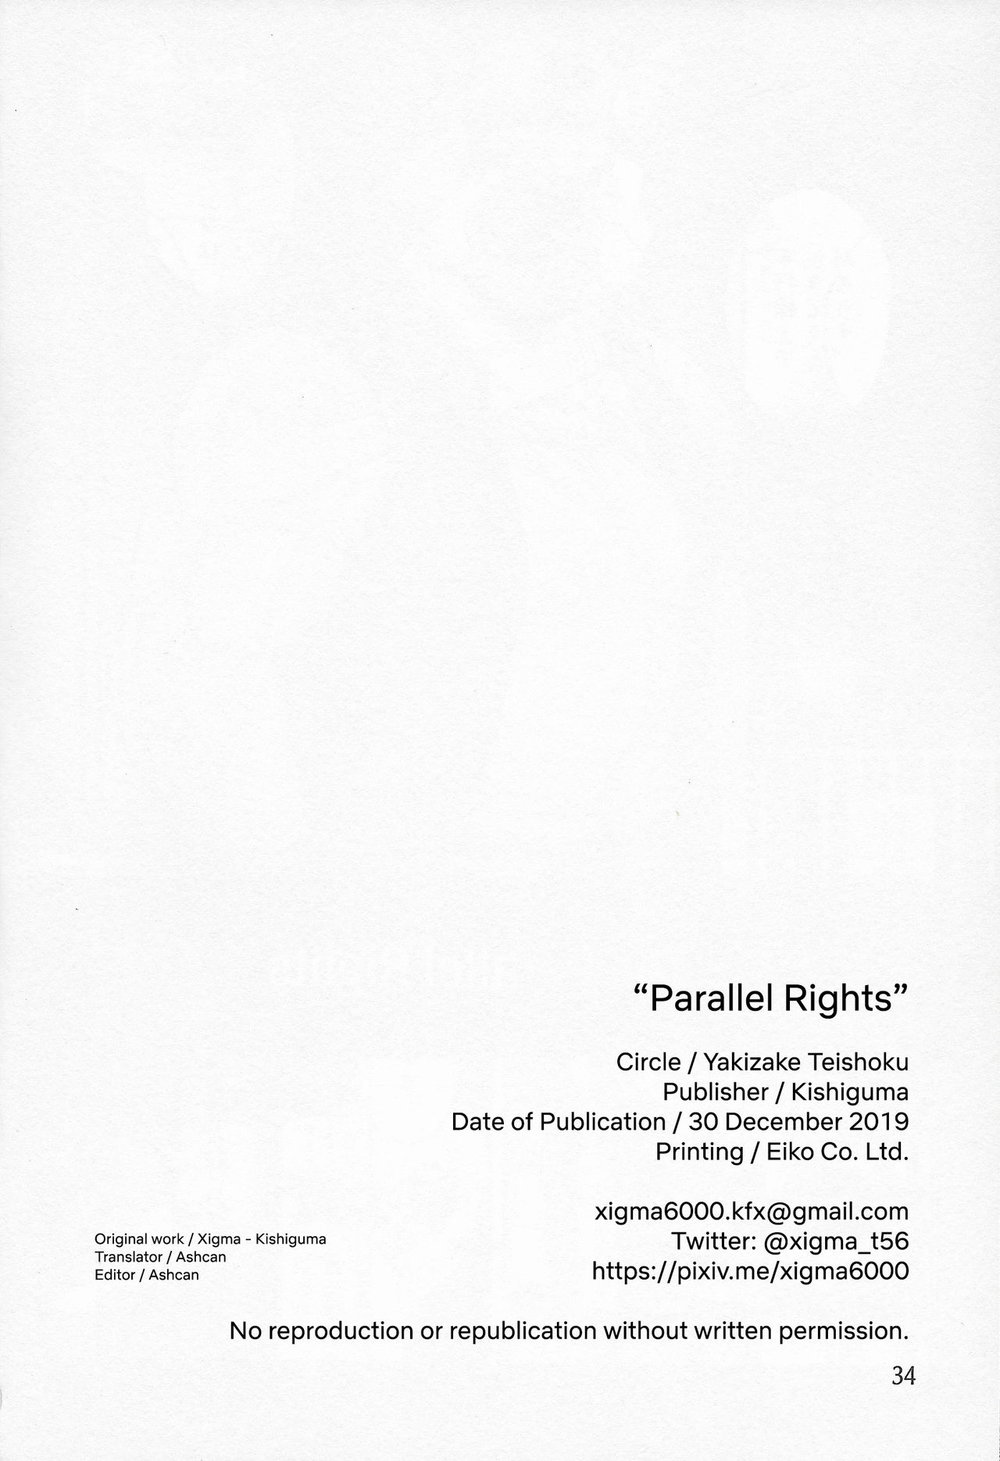 Parallel Rights - Foto 33